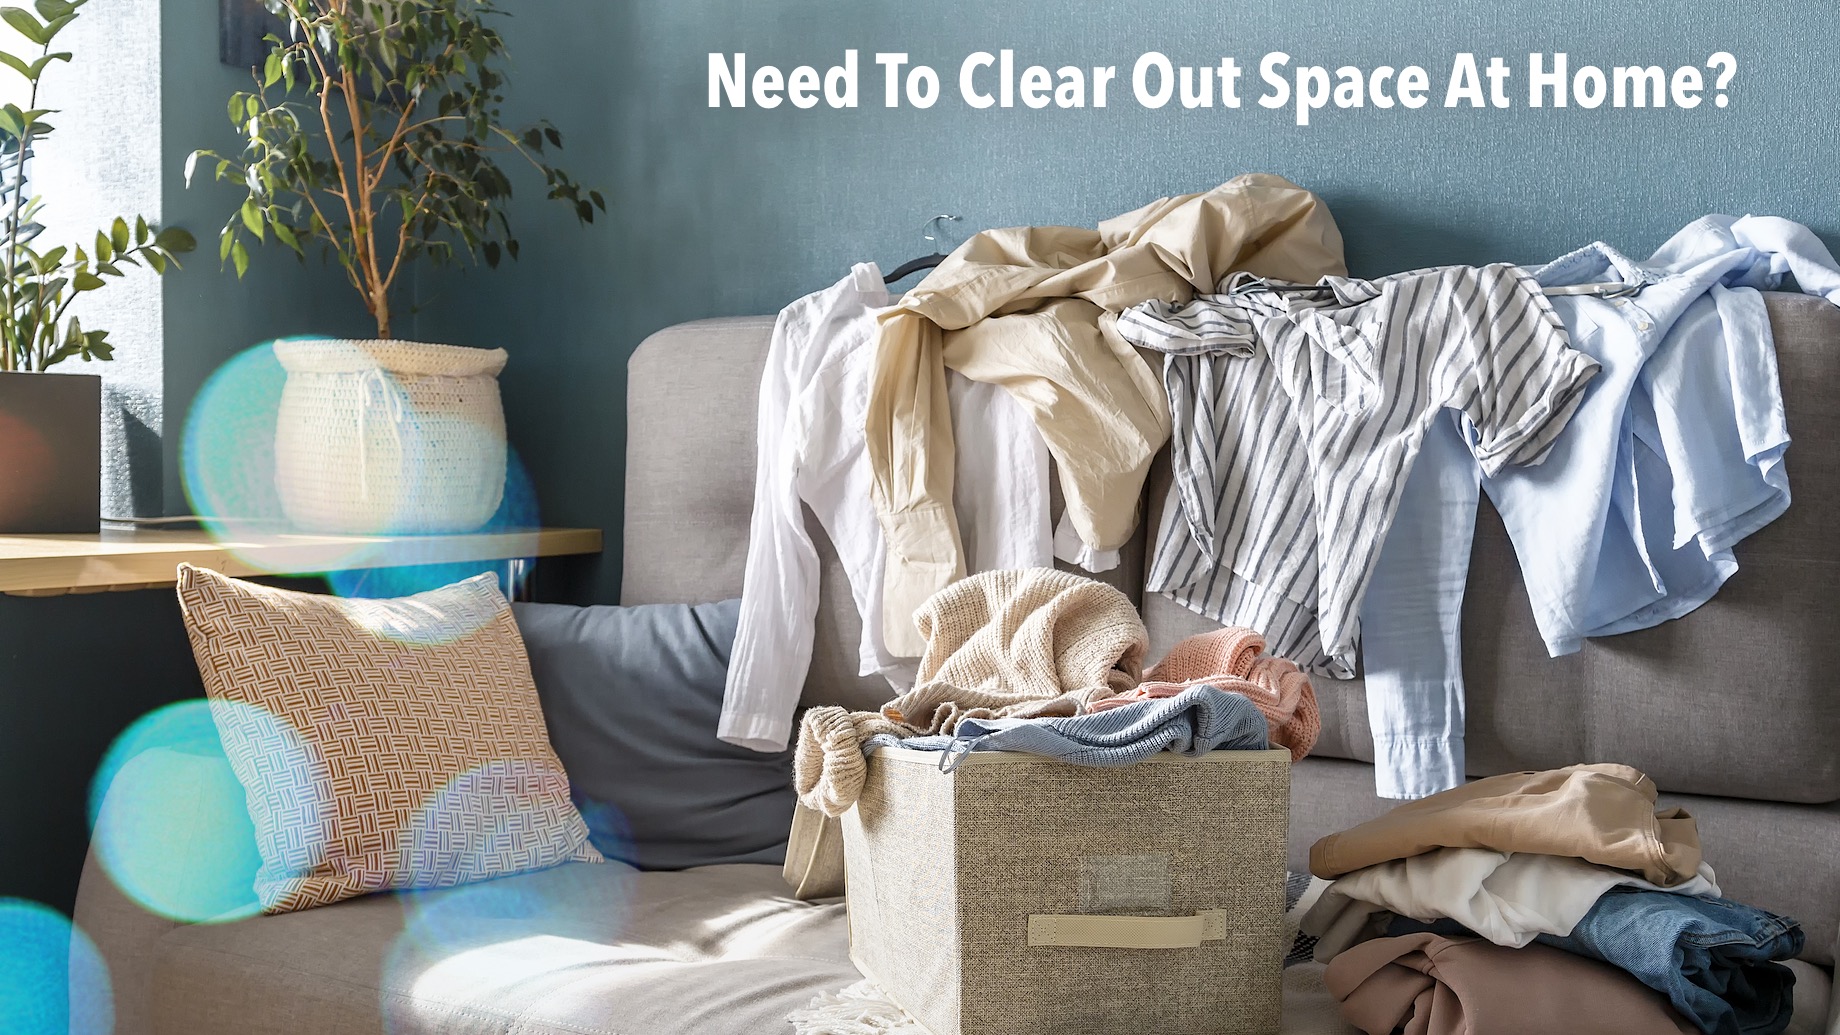 Need To Clear Out Space At Home? Here Are 6 Ways To Do It